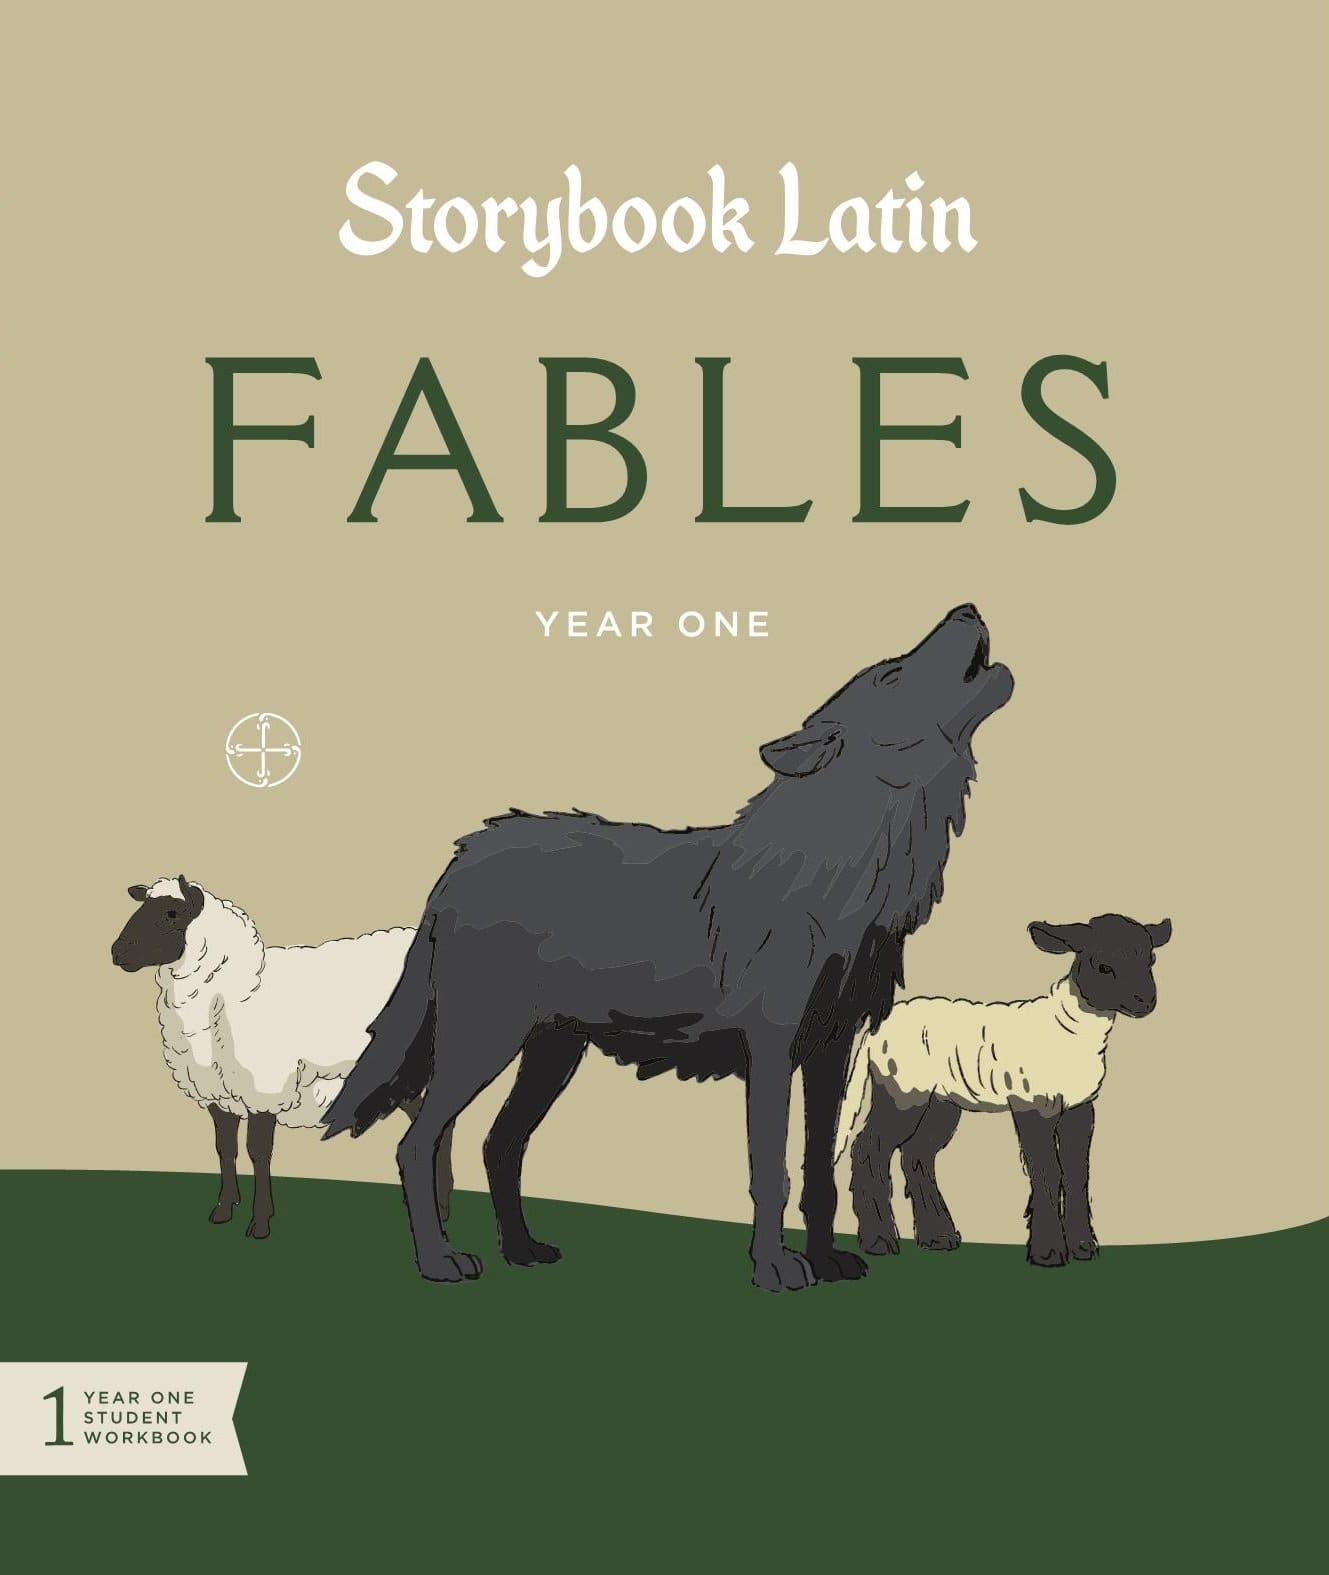 Storybook Latin 1: Fables